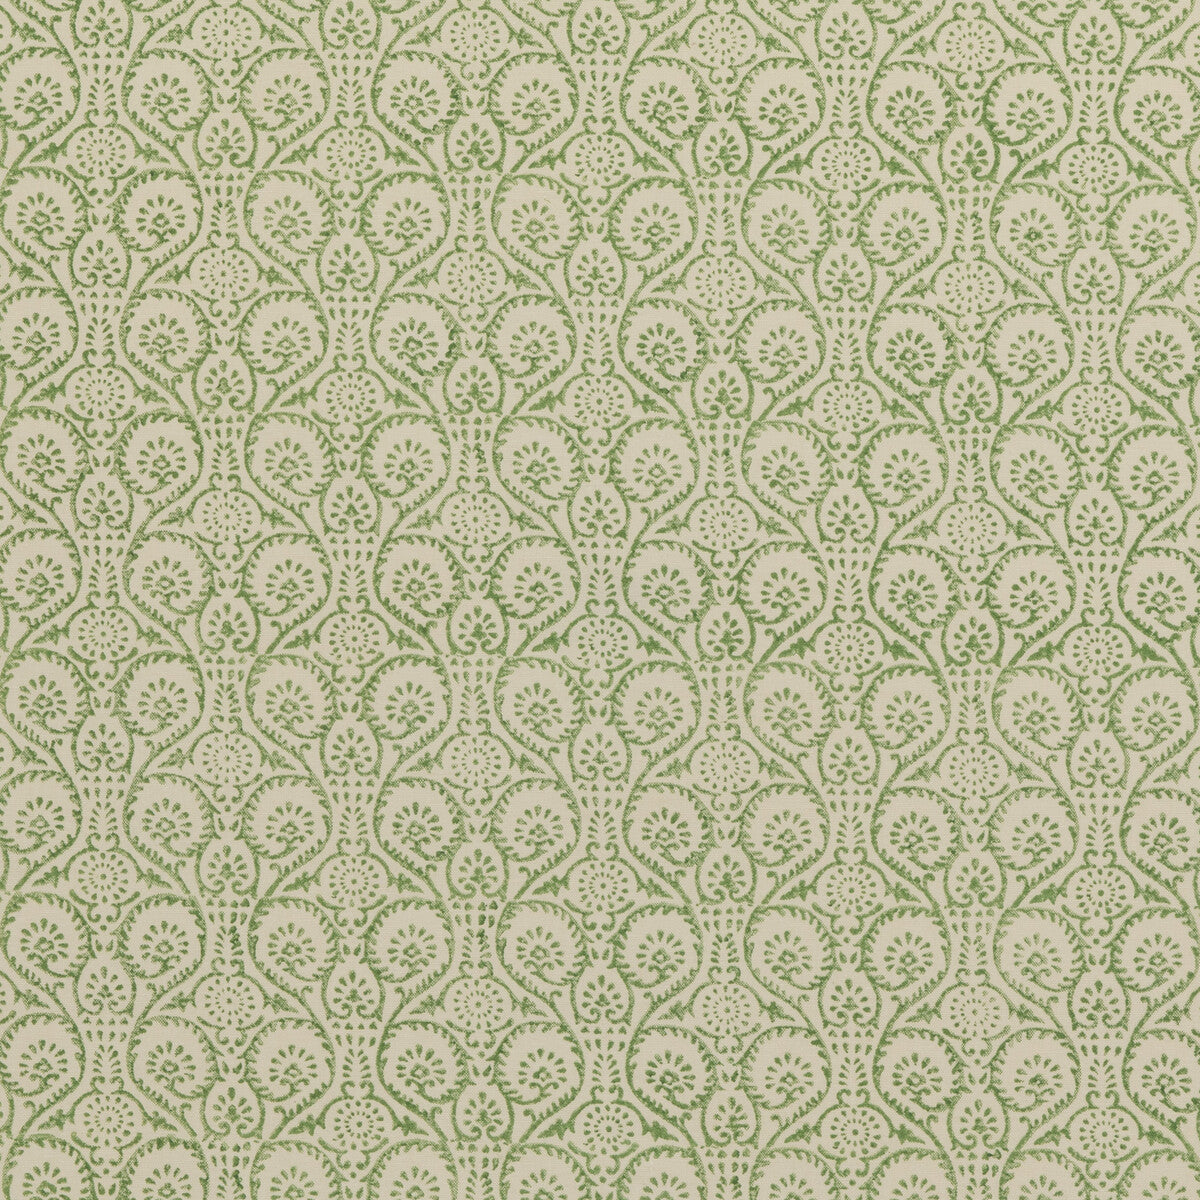 Pollen Trail fabric in green color - pattern PP50481.5.0 - by Baker Lifestyle in the Block Party collection